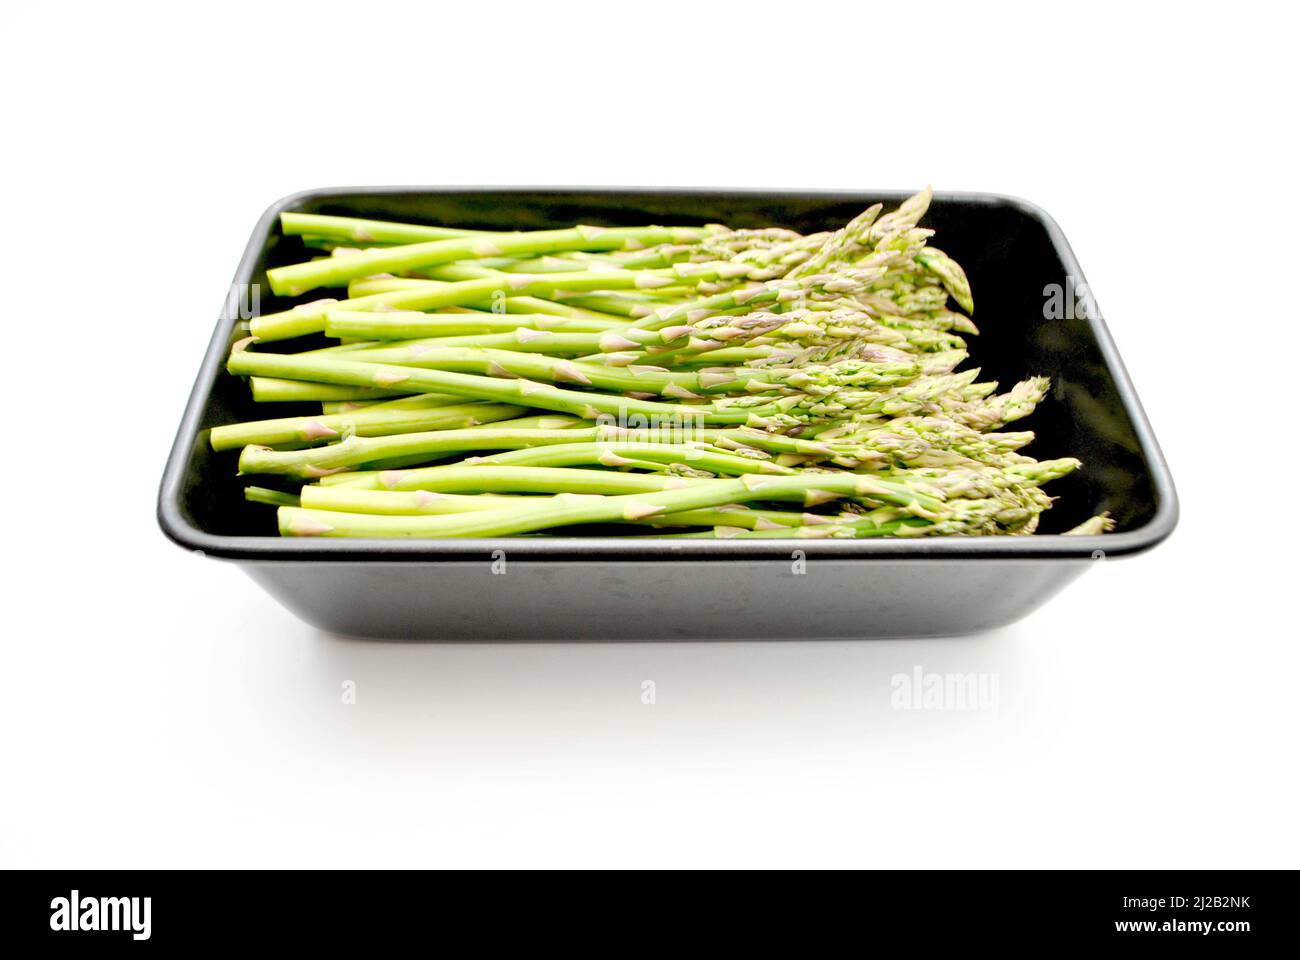 Green Asparagus in a Black Baking Pan Isolated Over a White Background Stock Photo